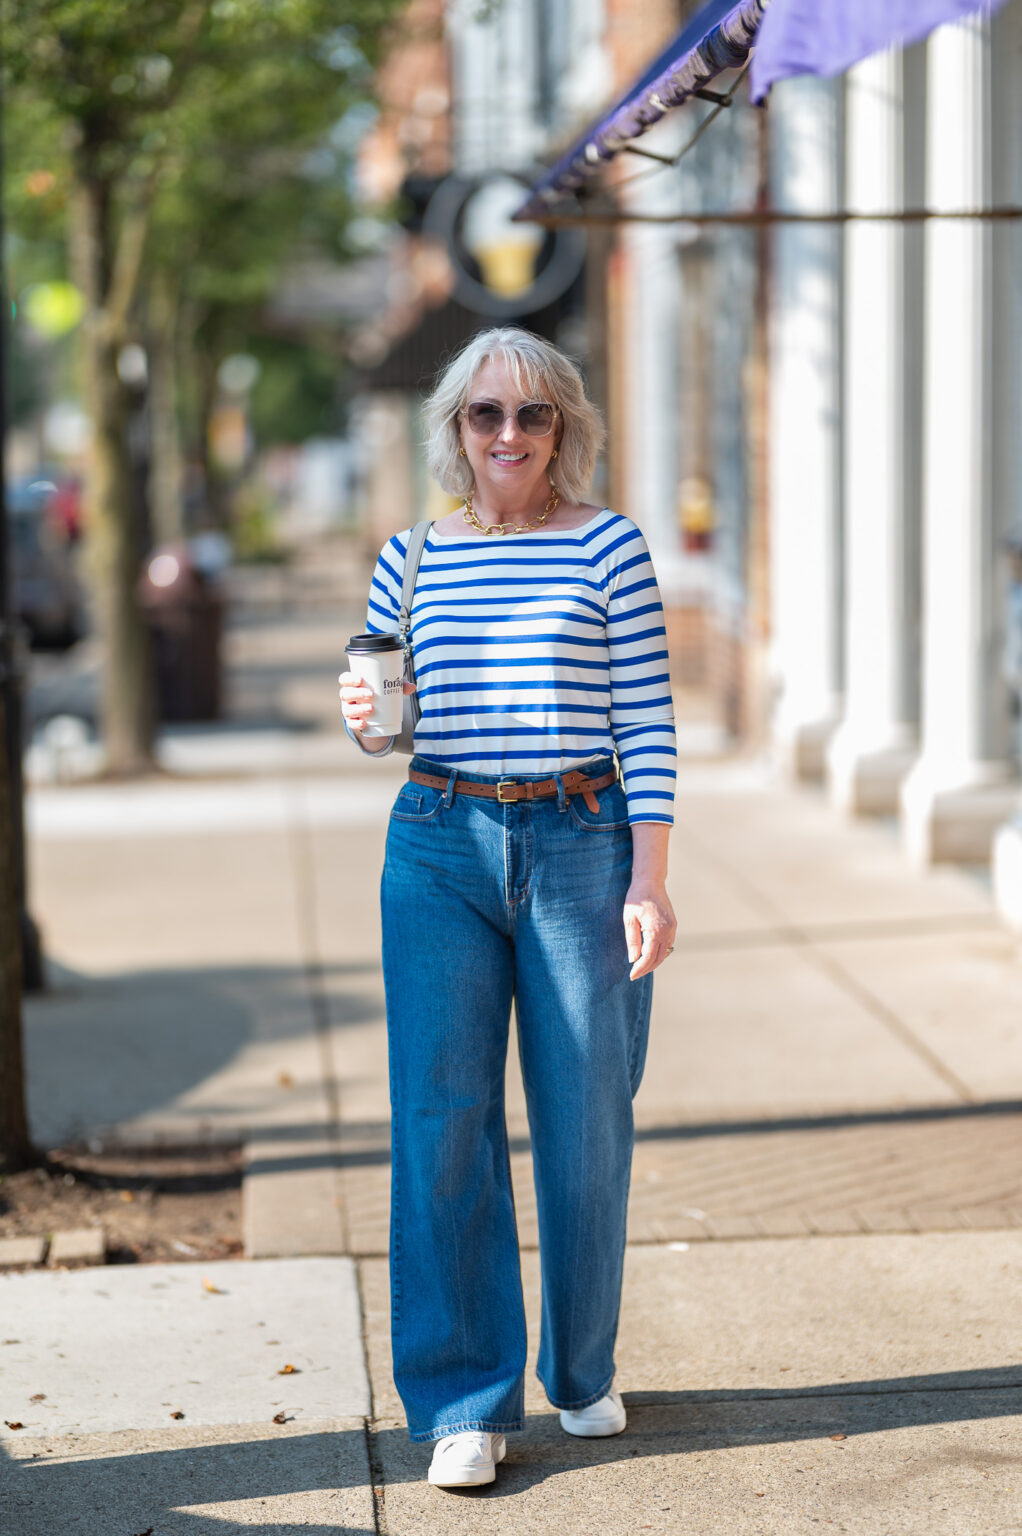 5 Tips to Help You Look Great in Jeans Over 50 - Dressed for My Day